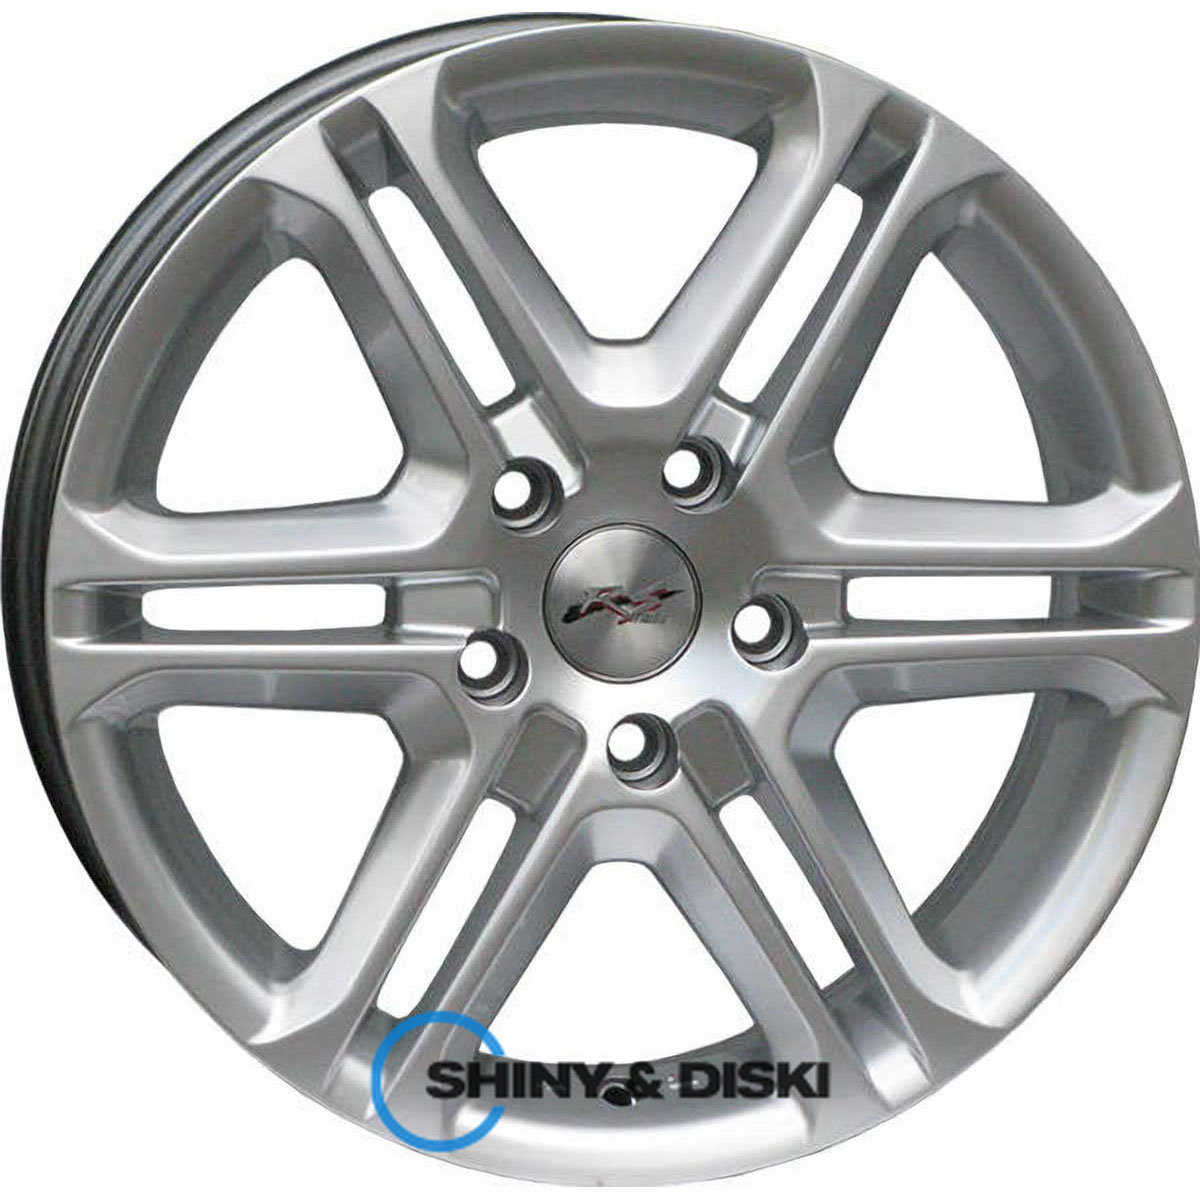 rs tuning 789 hs r15 w6.5 pcd5x112 et38 dia57.1